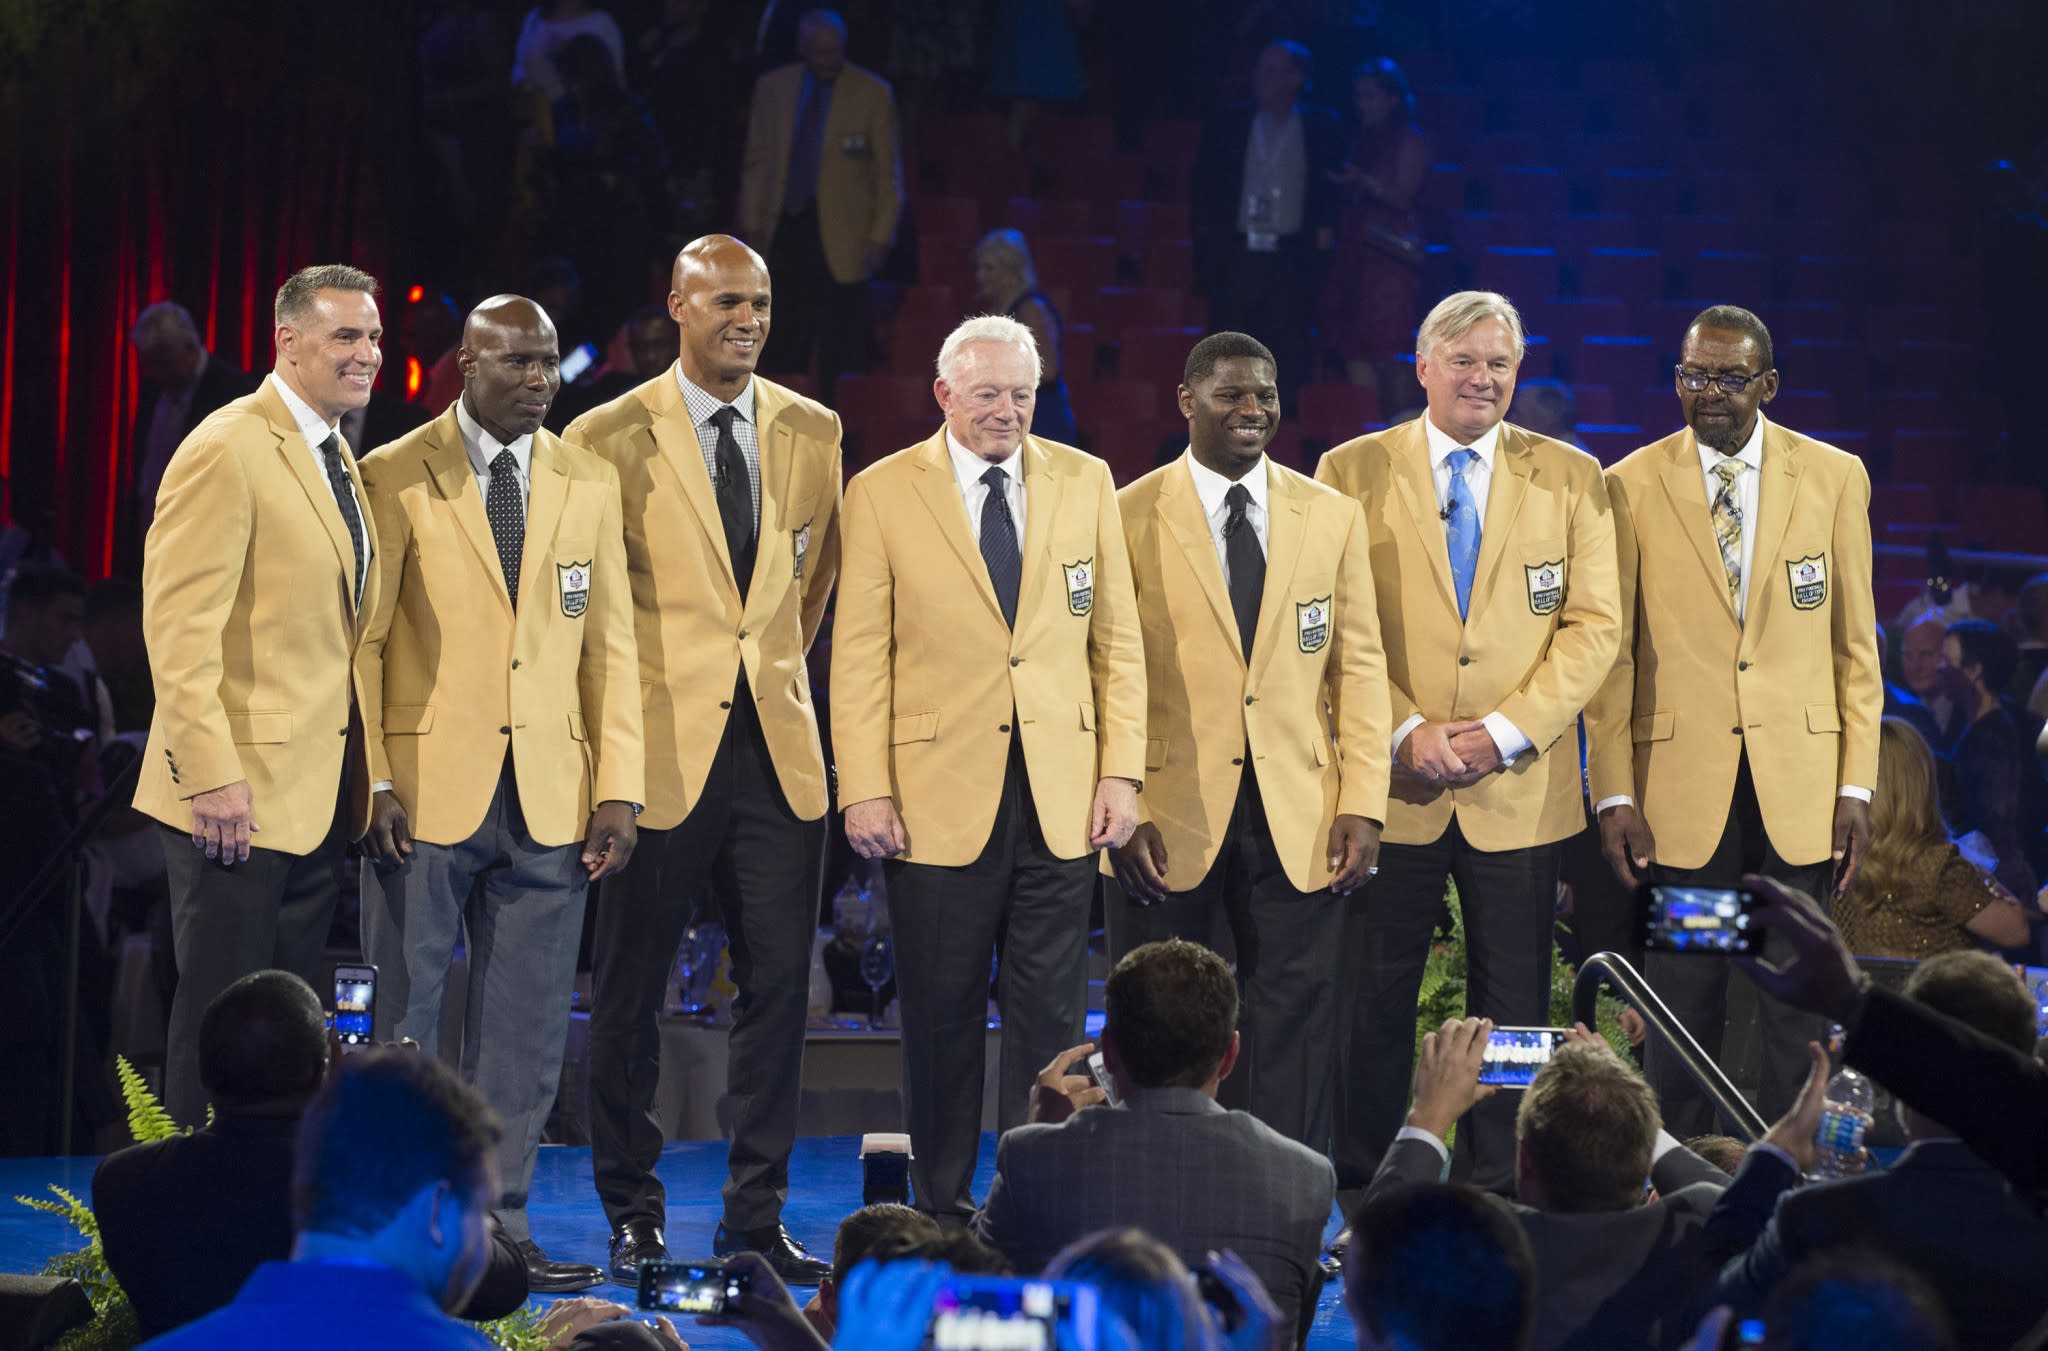 Highlights From The Speeches Of The 2017 Pro Football Hall Of Fame Class